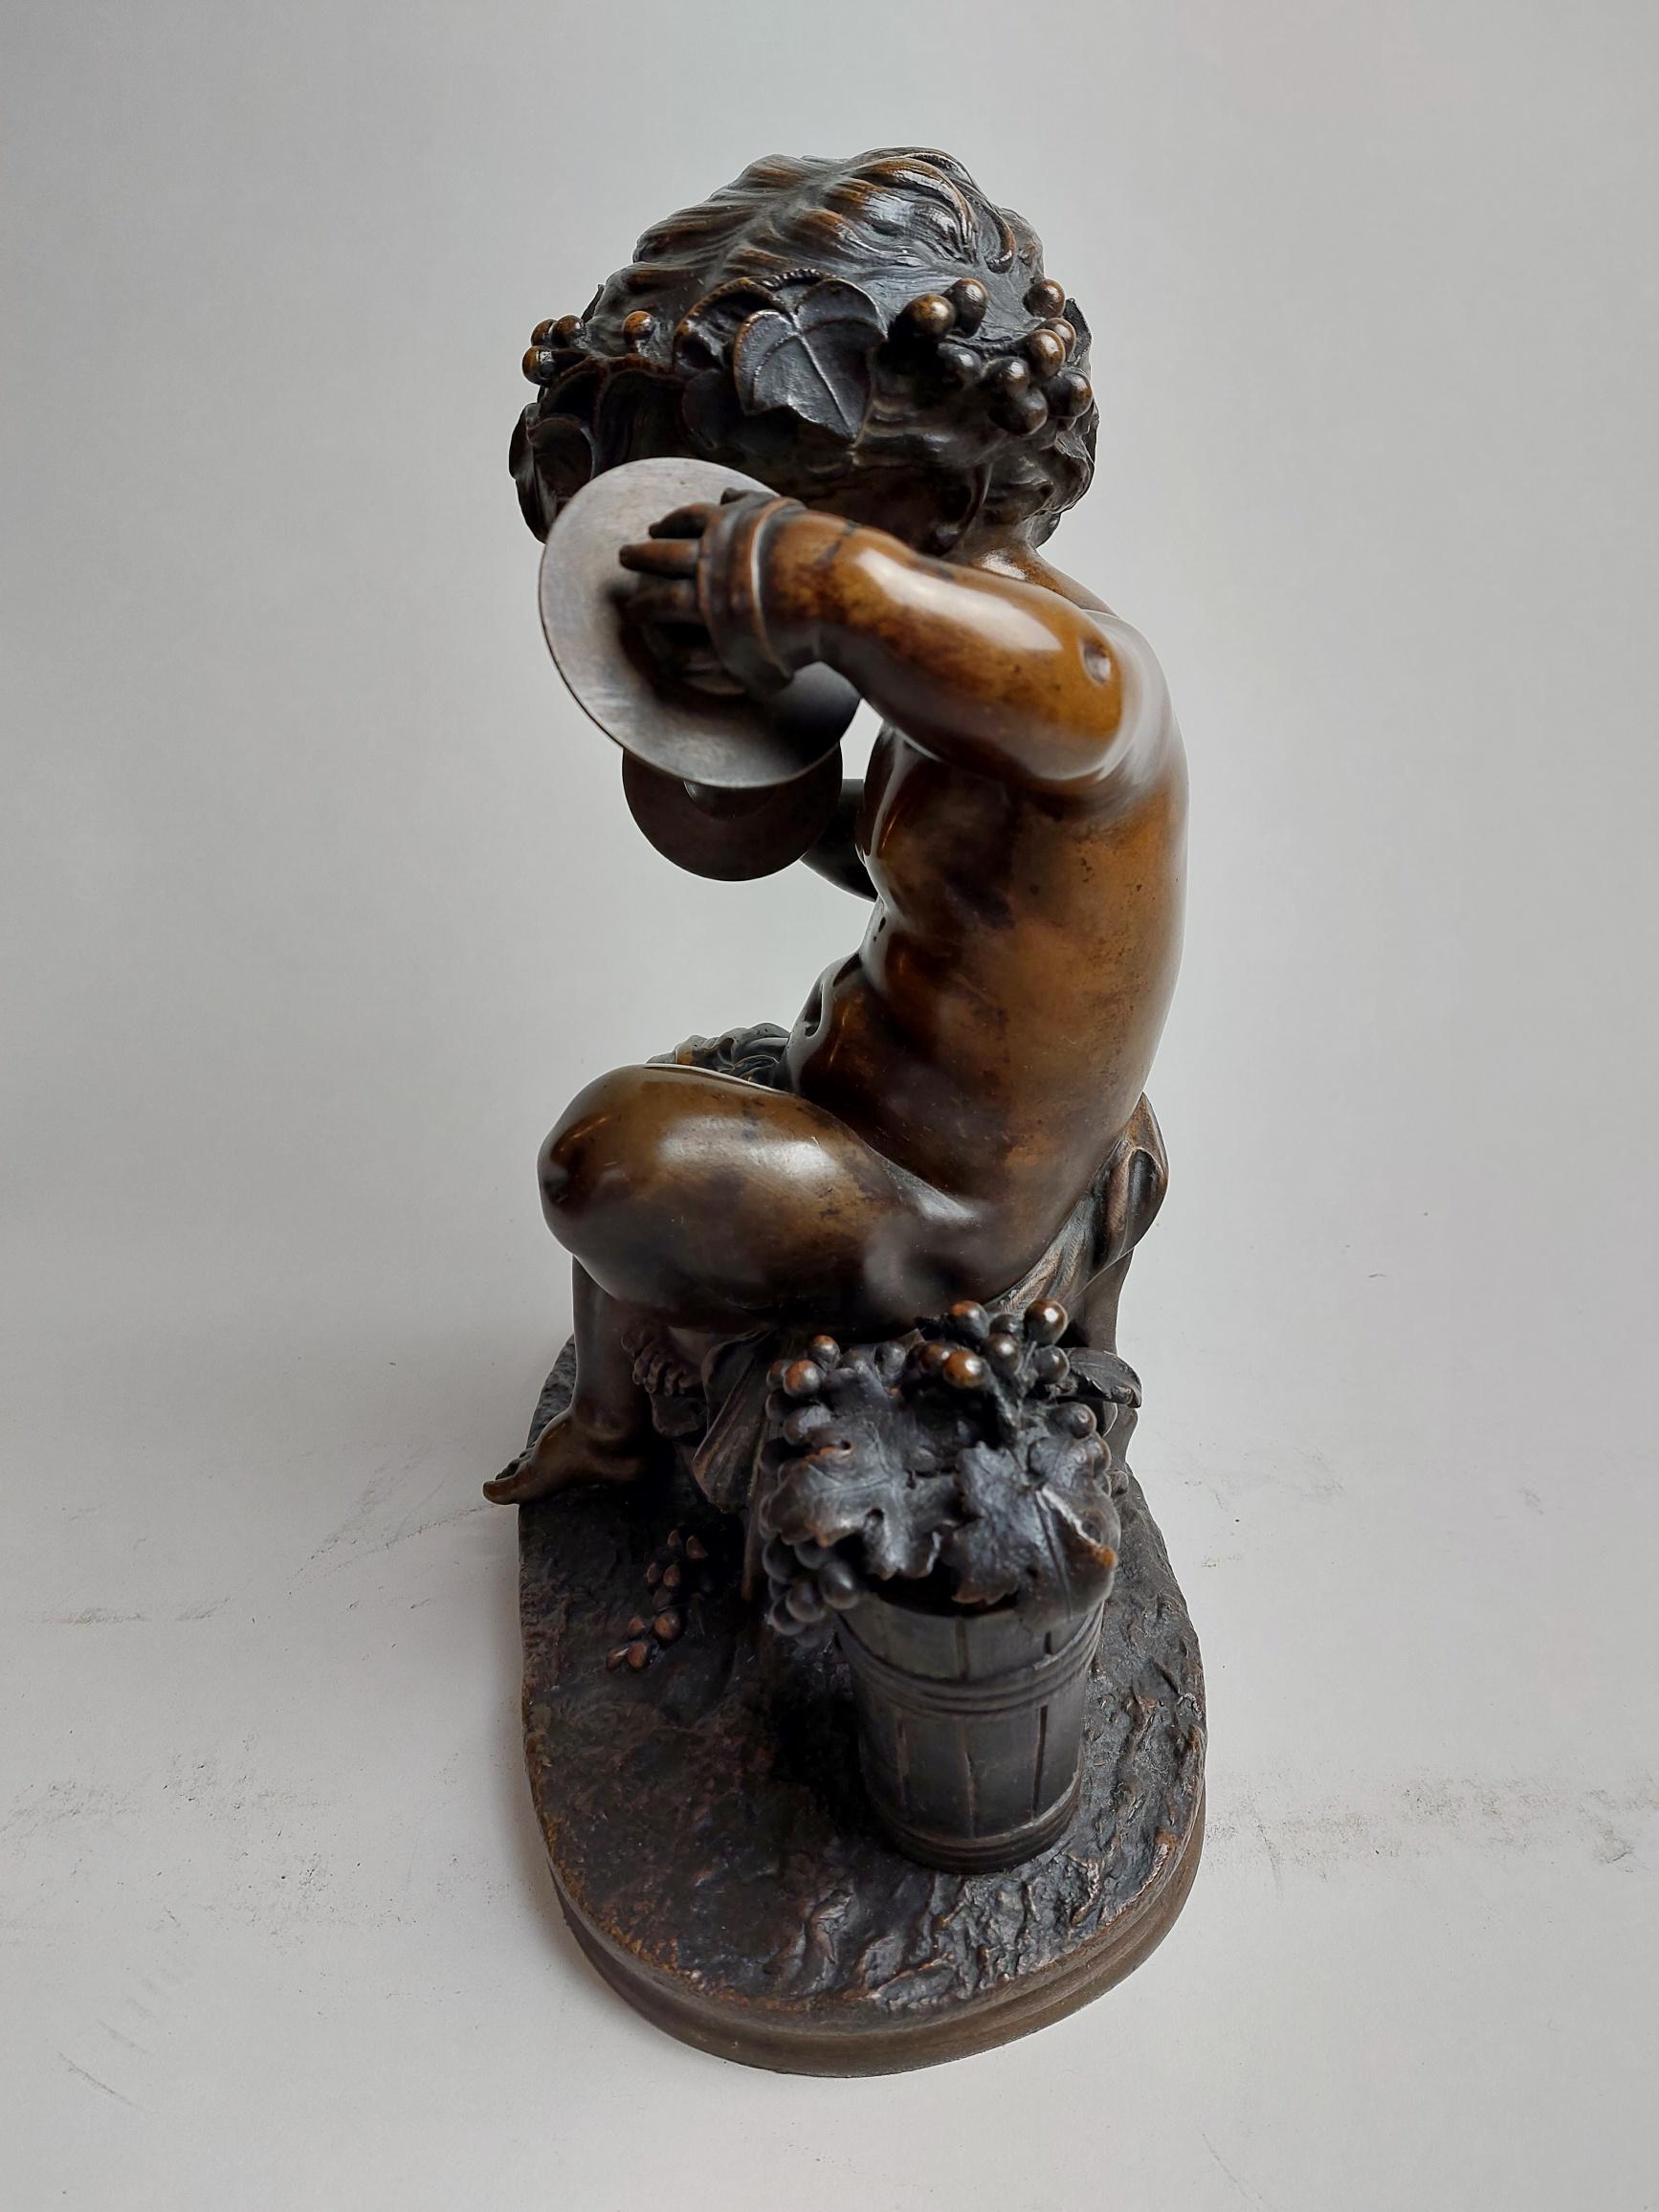 A sweet 19th century bronze of a seated cherub (putto) playing a pair of cymbals, an overflowing basket of grapes stands at his side with more scattered around his feet, suggesting perhaps he is a herald of Baccus the Greek God of wine.